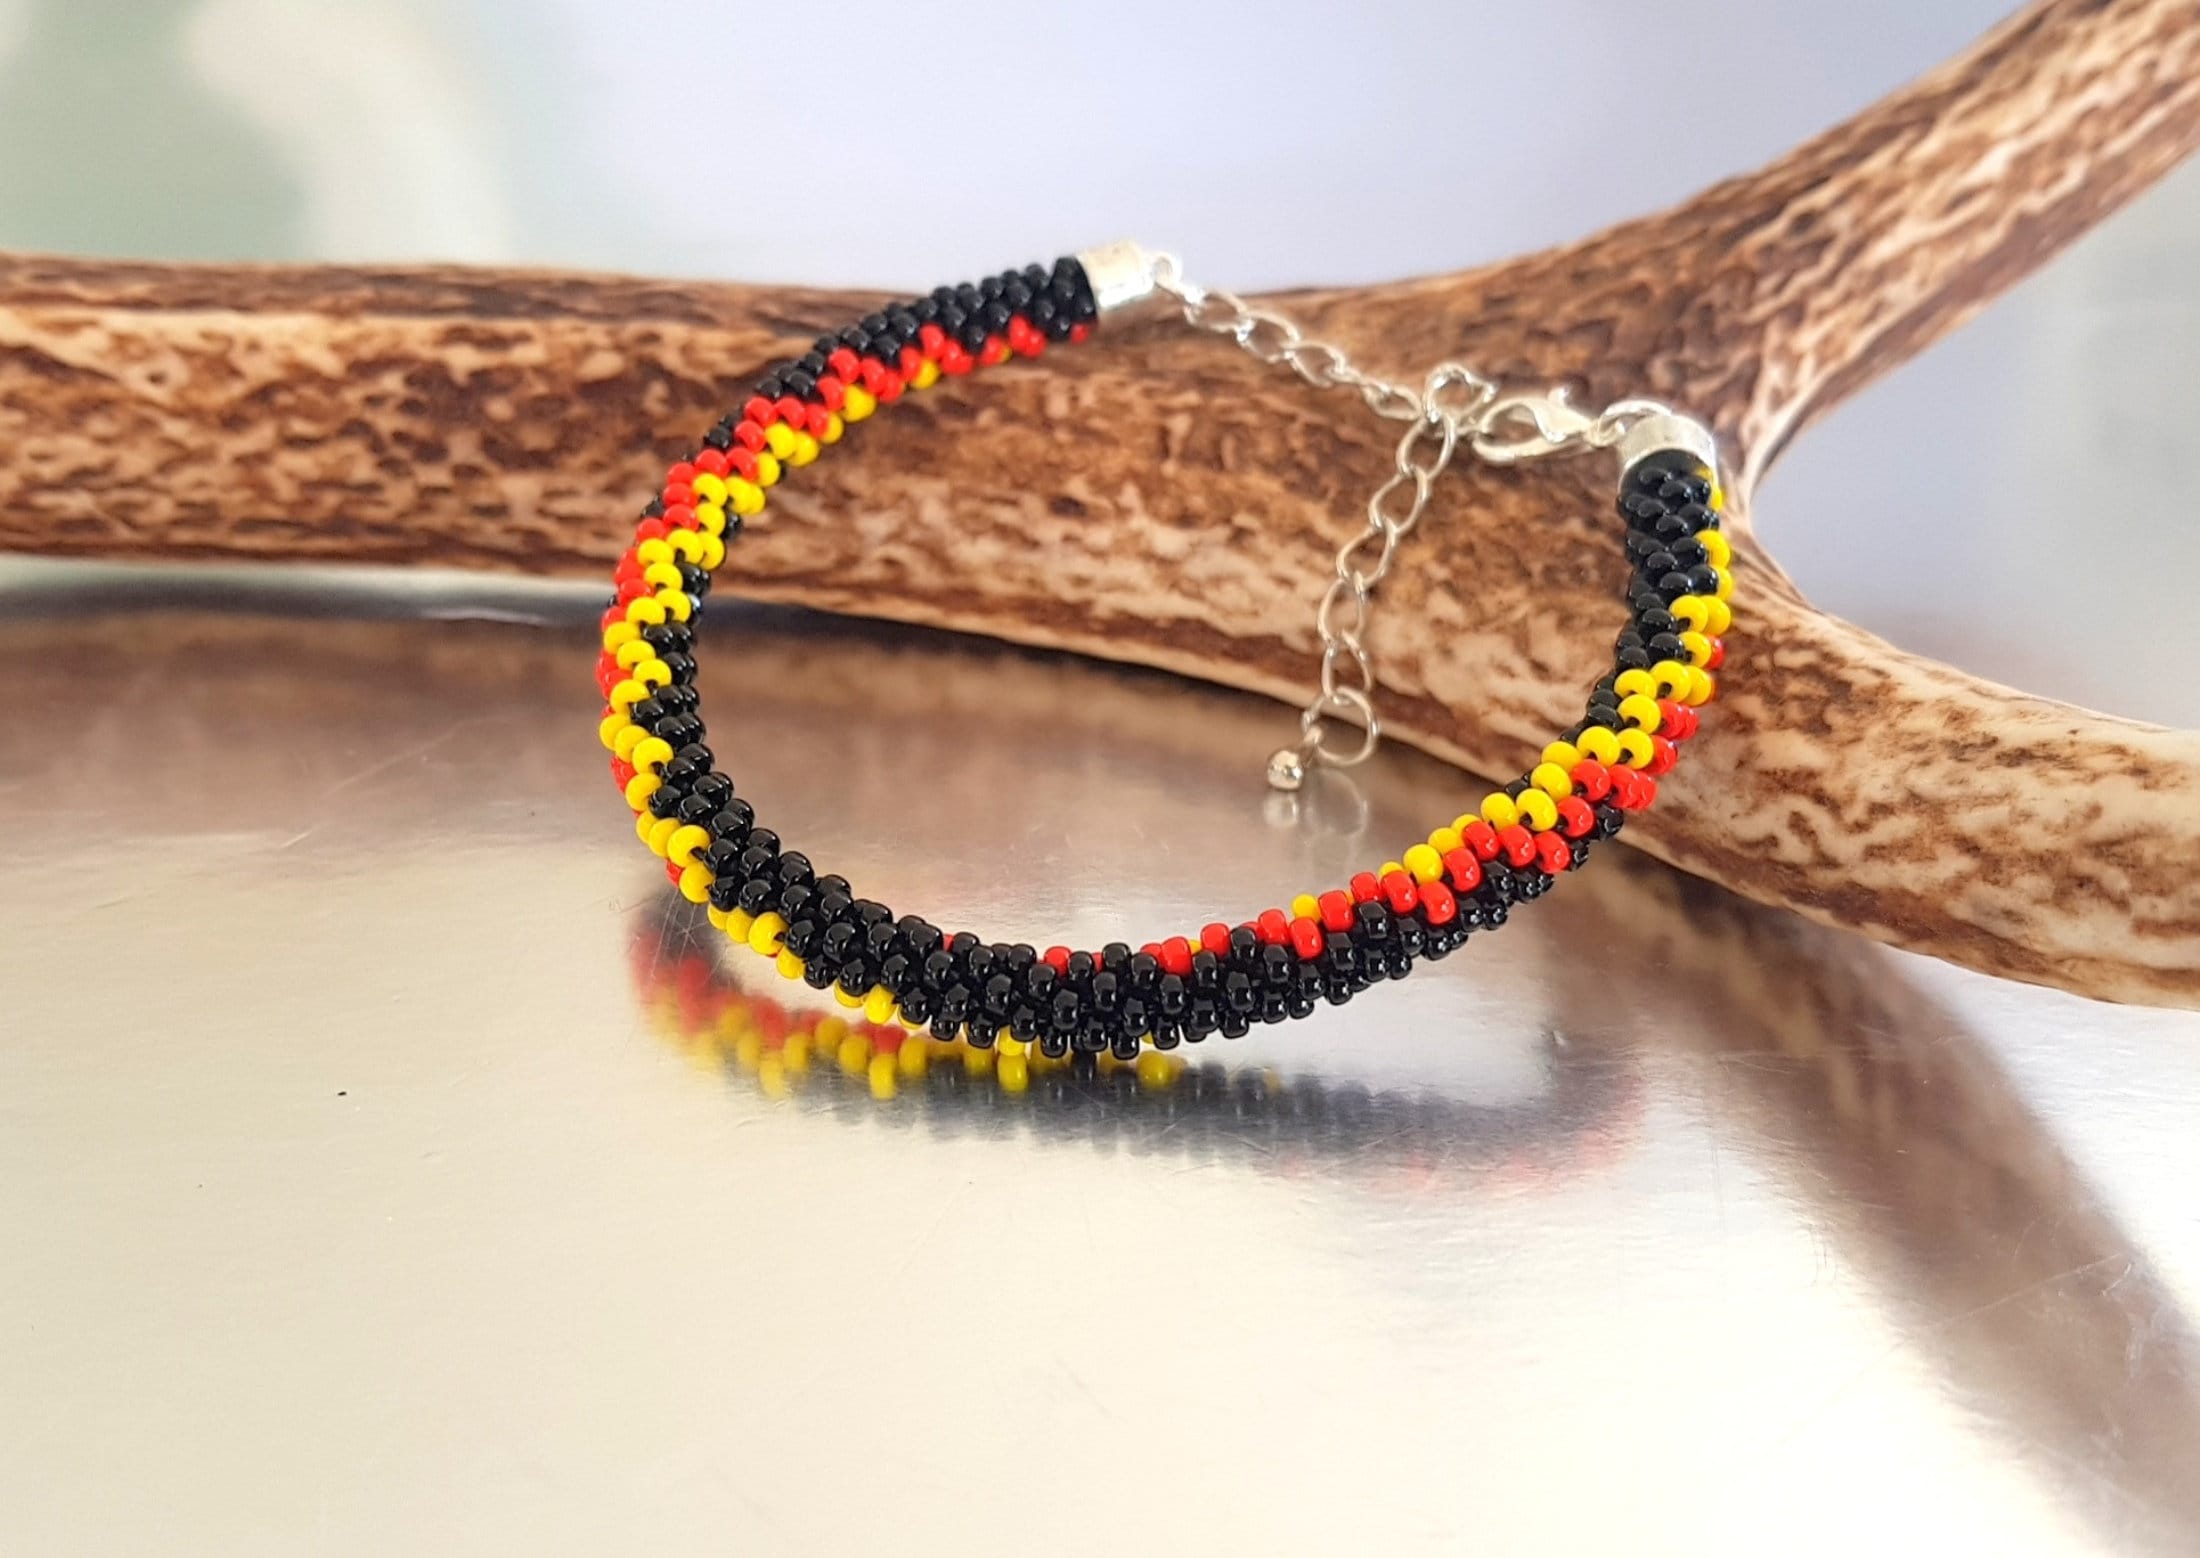 Kumihimo Pattern and Tutorial PDF Loading Instruction Stripes Rainbow  Necklaces 2 in 1 Seed Beads Jewellery Beaded Braiding 